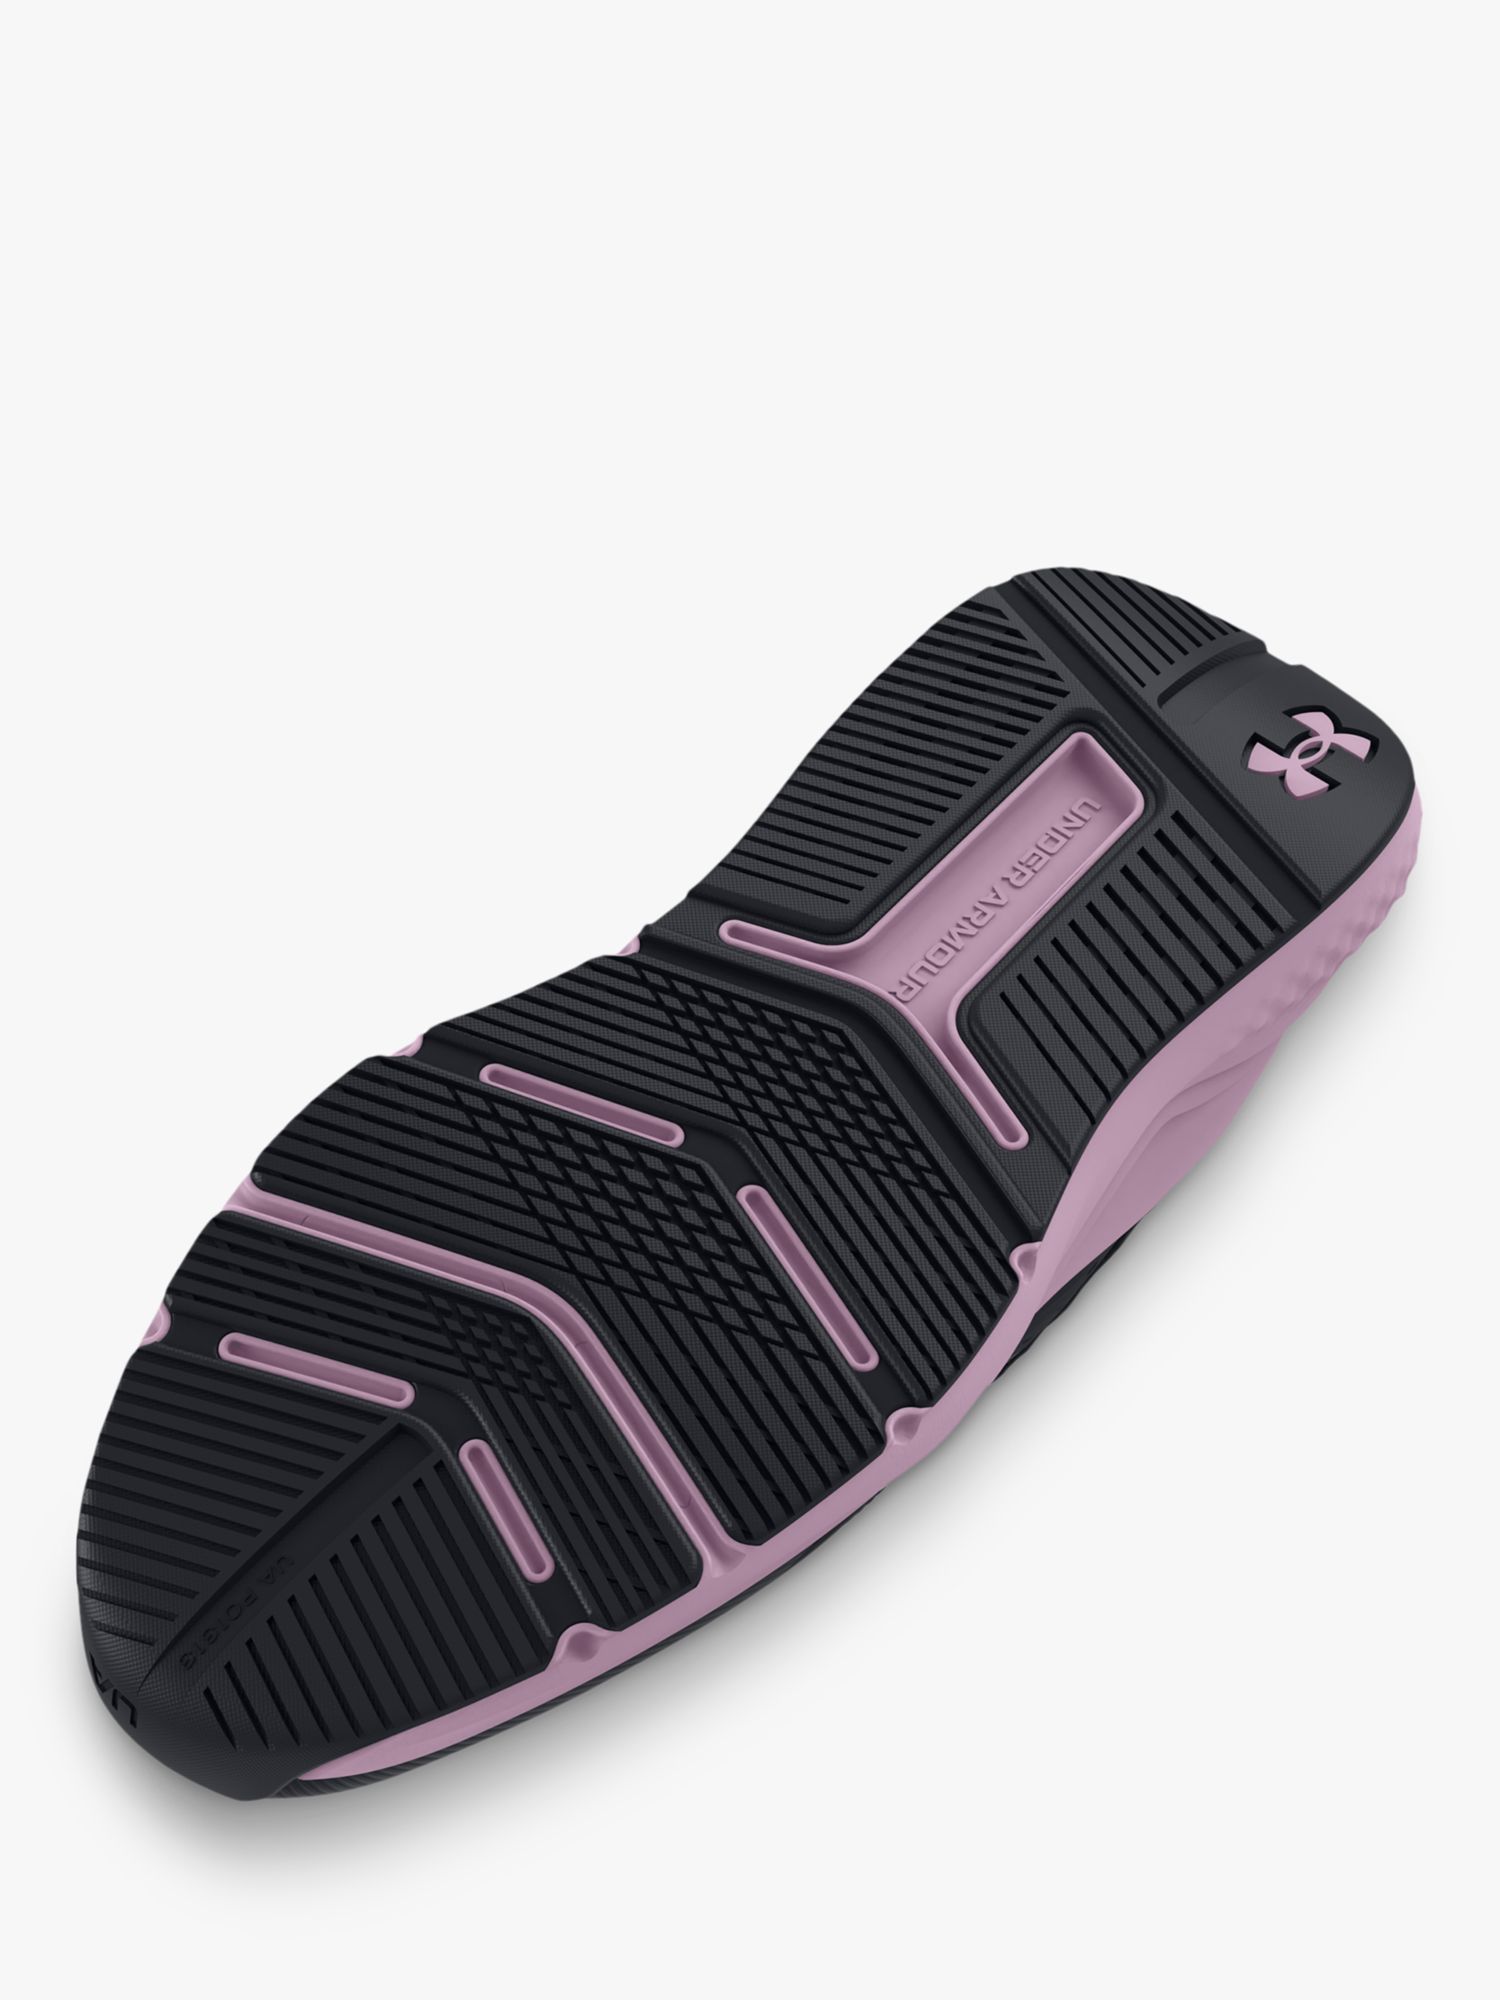 Buy Under Armour Charged Women's Sports Shoes, Black/Purple Online at johnlewis.com